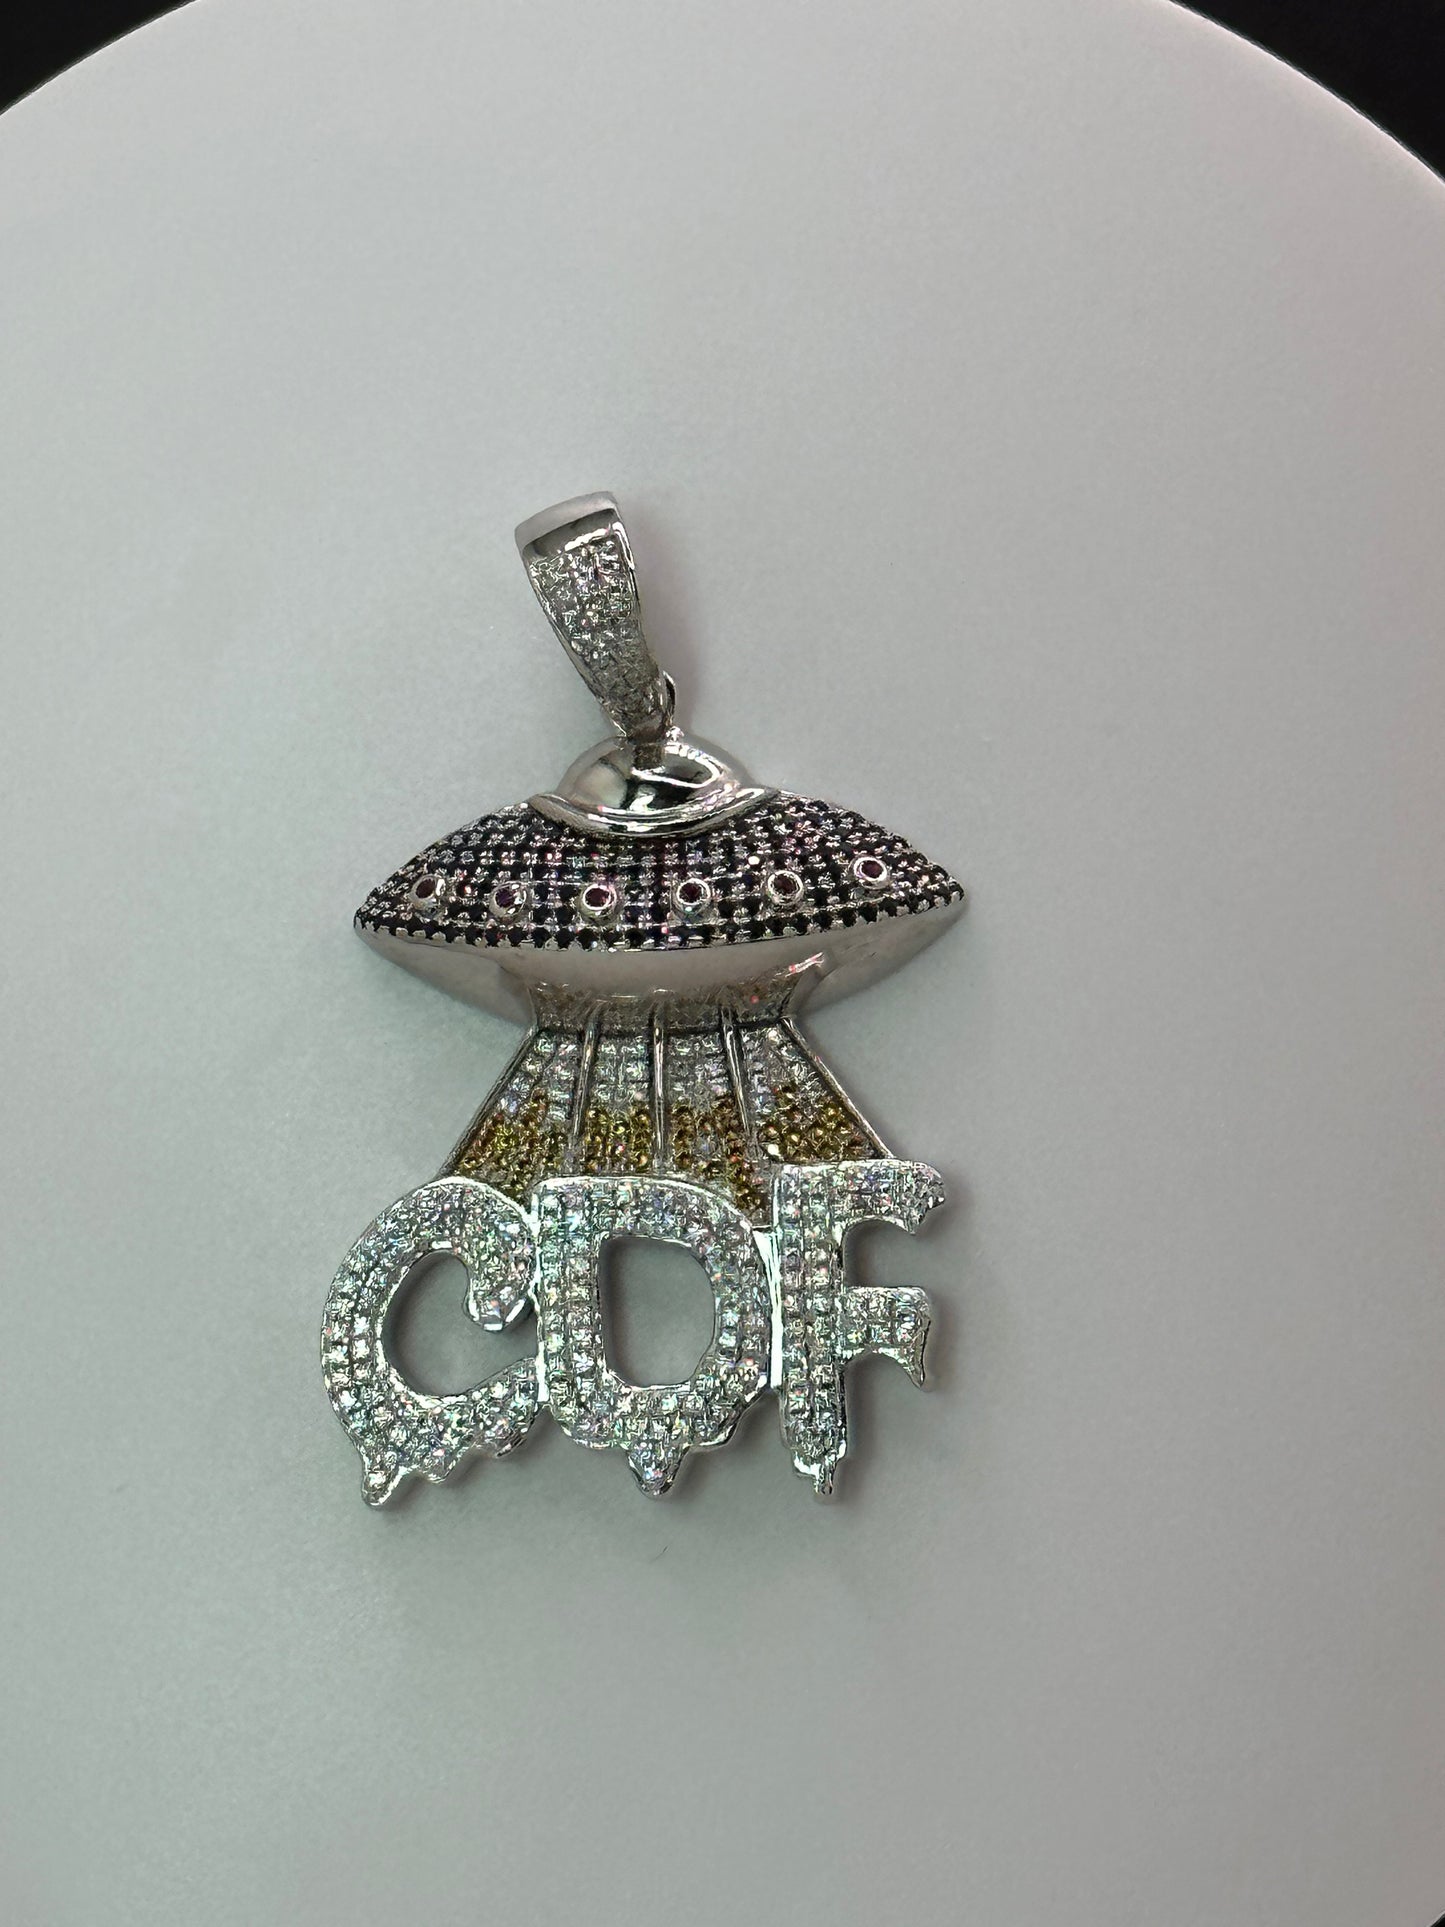 Spaceship Pendant with the letter CDF